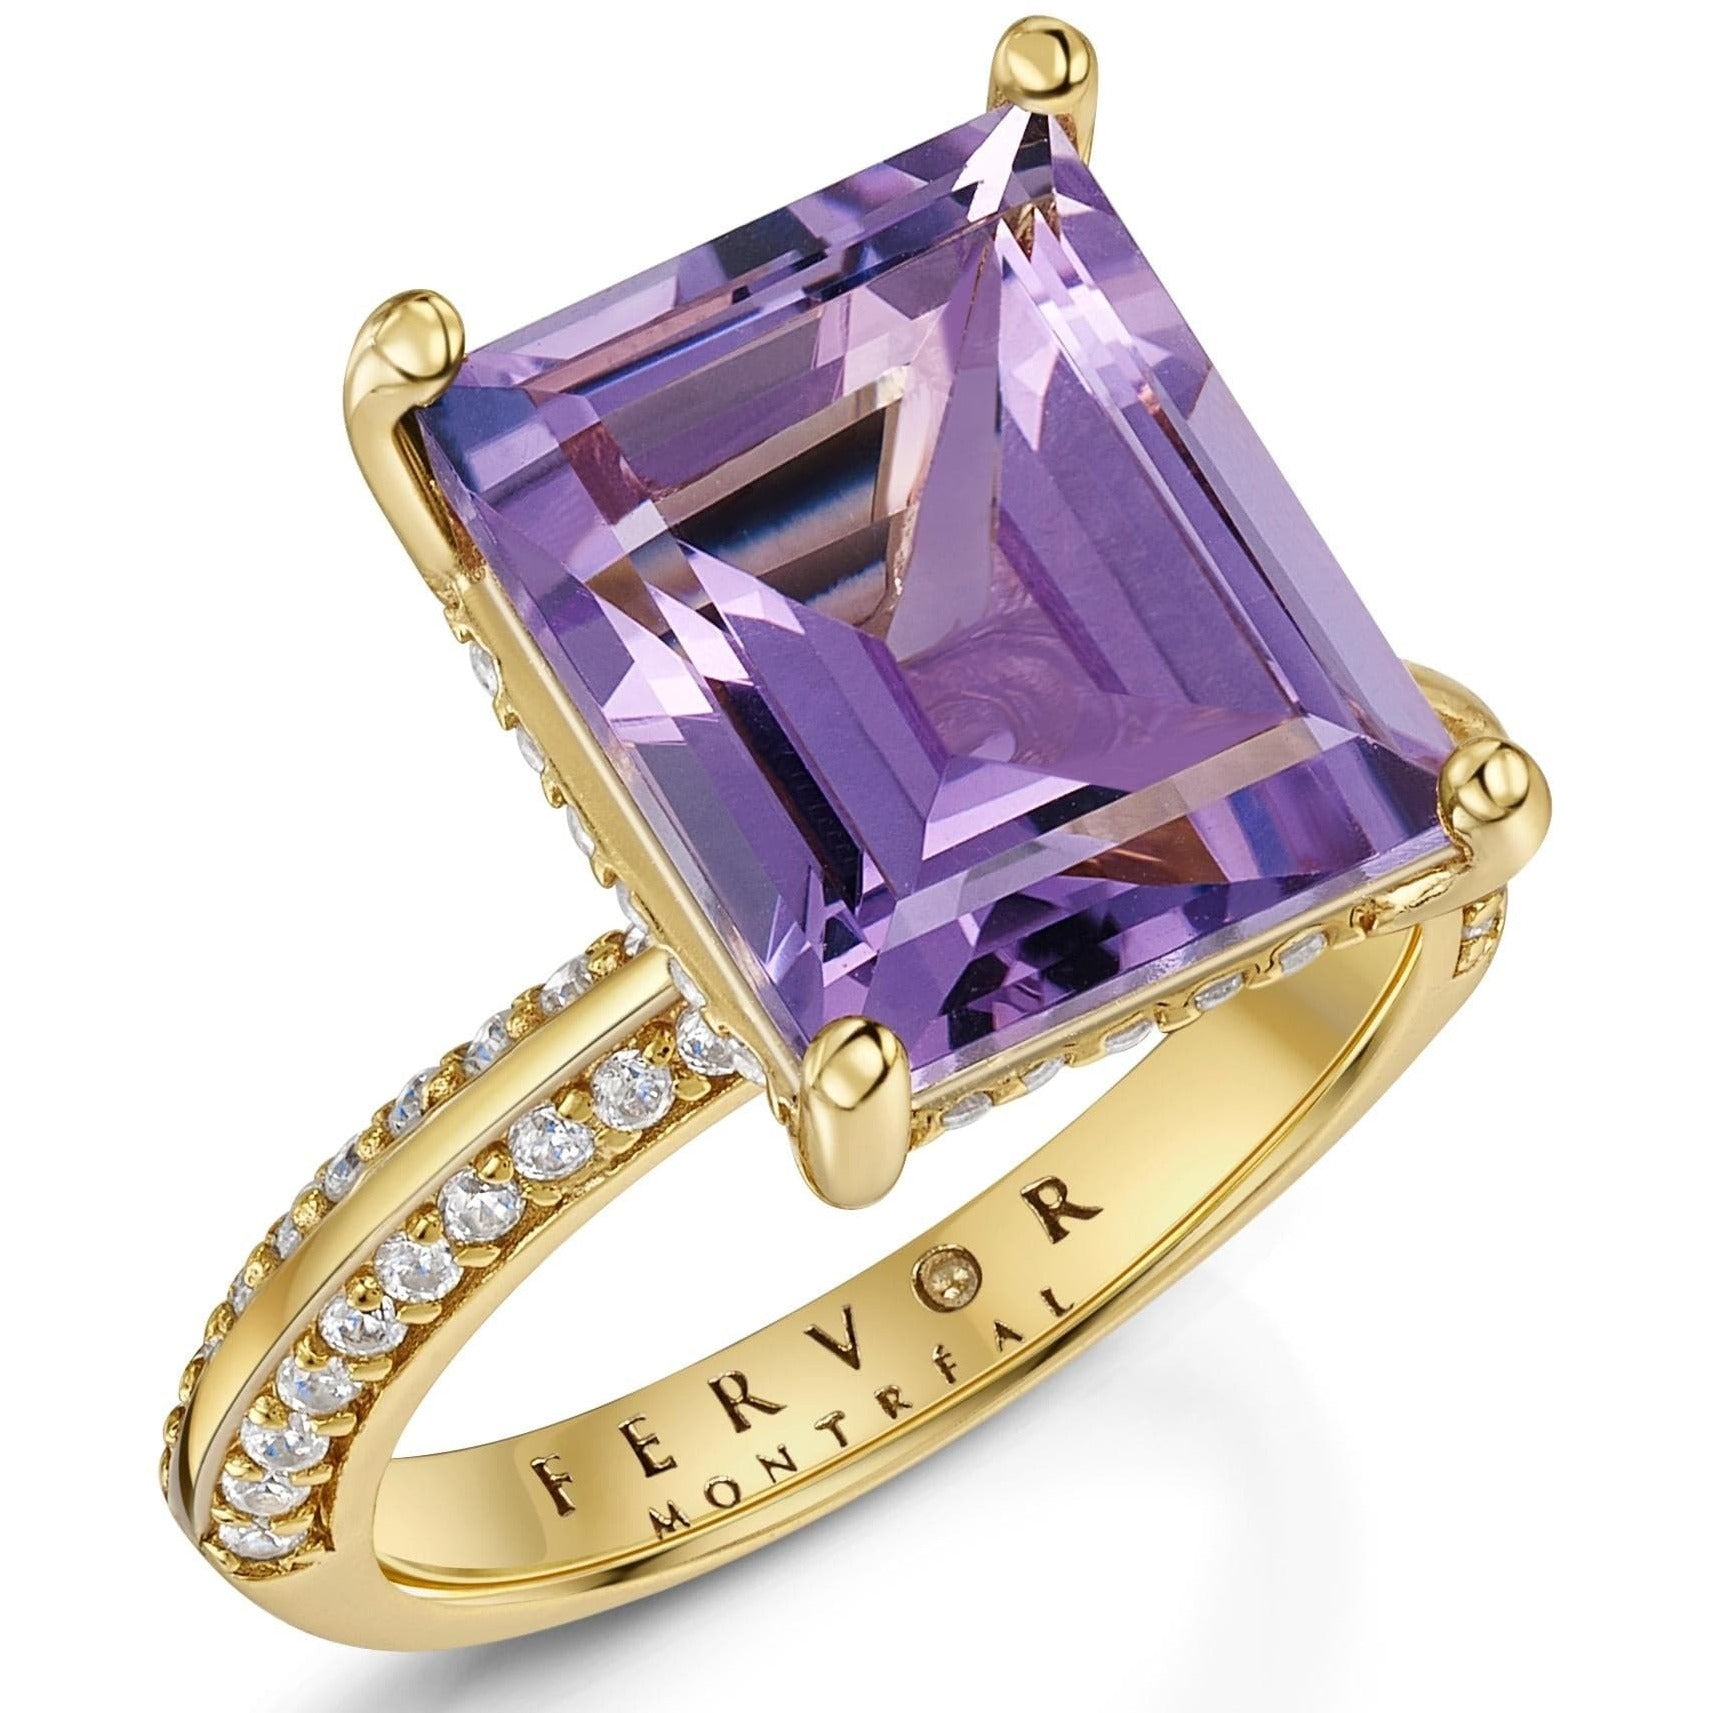 Fervor Montreal Rings Pink Amethyst Emerald Cut Cocktail Ring